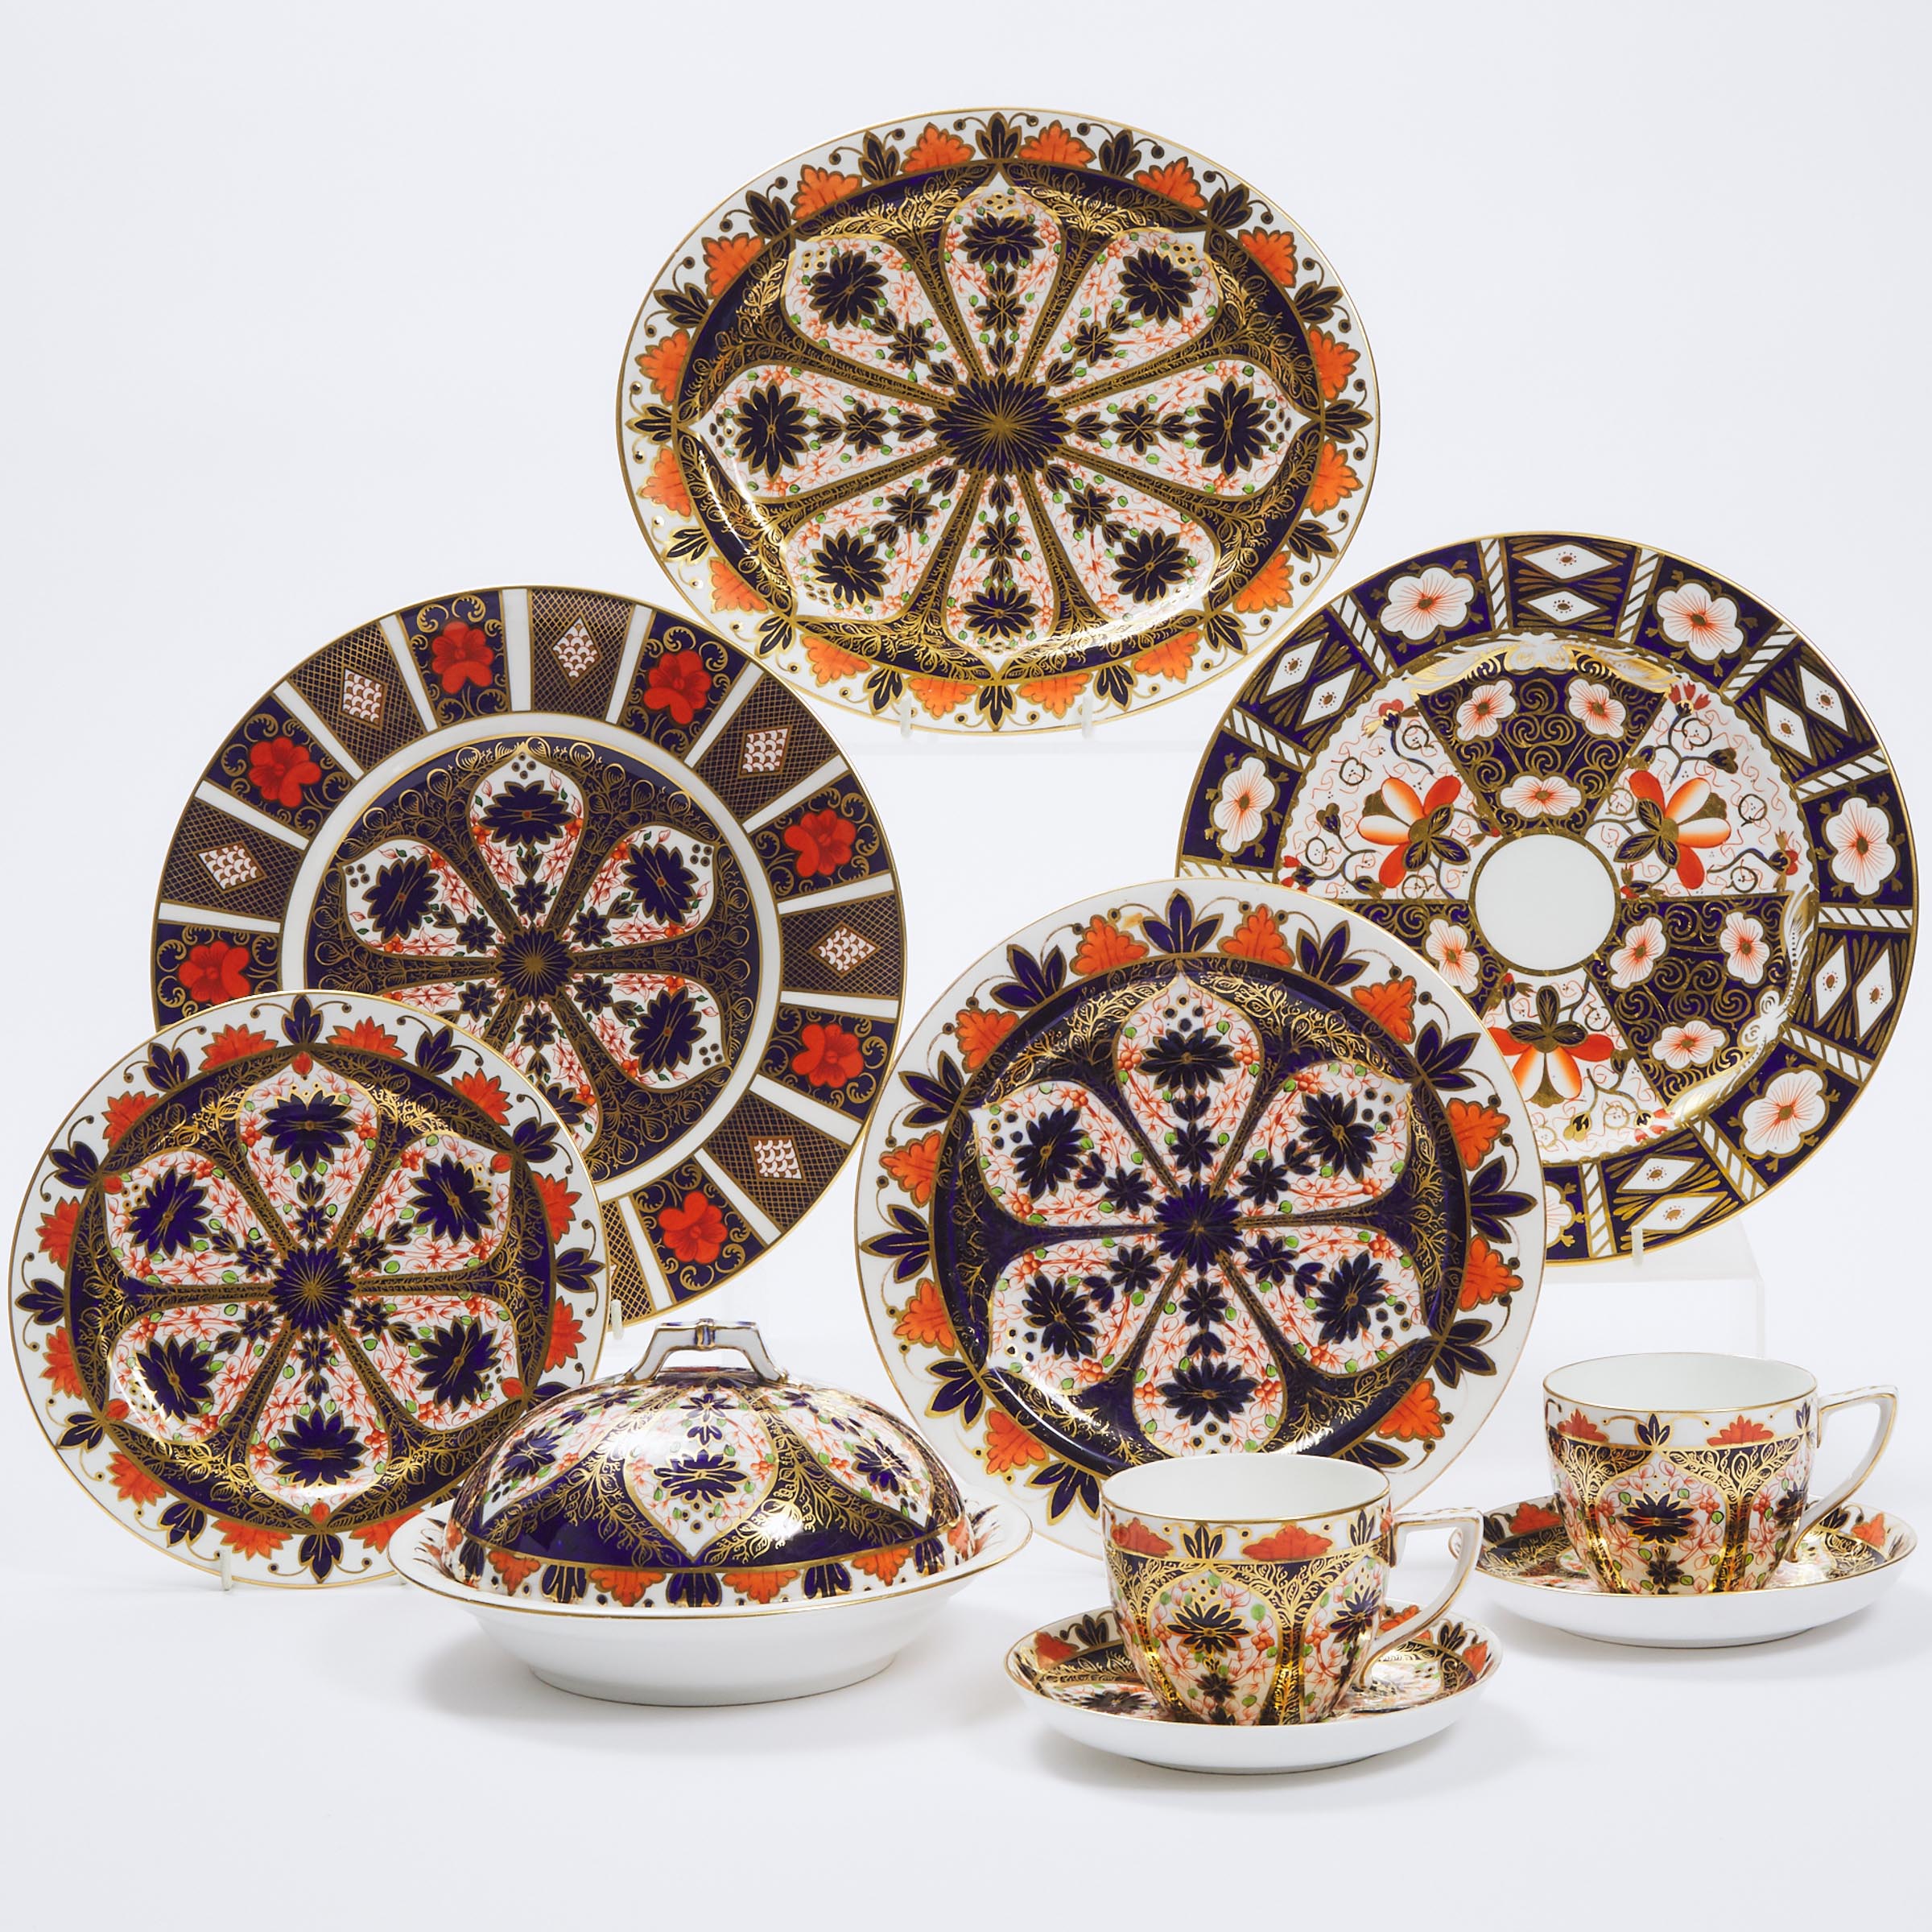 Group of Royal Crown Derby ‘Imari’ (876, 1128 & 2451) Pattern Tablewares, late 19th/20th century